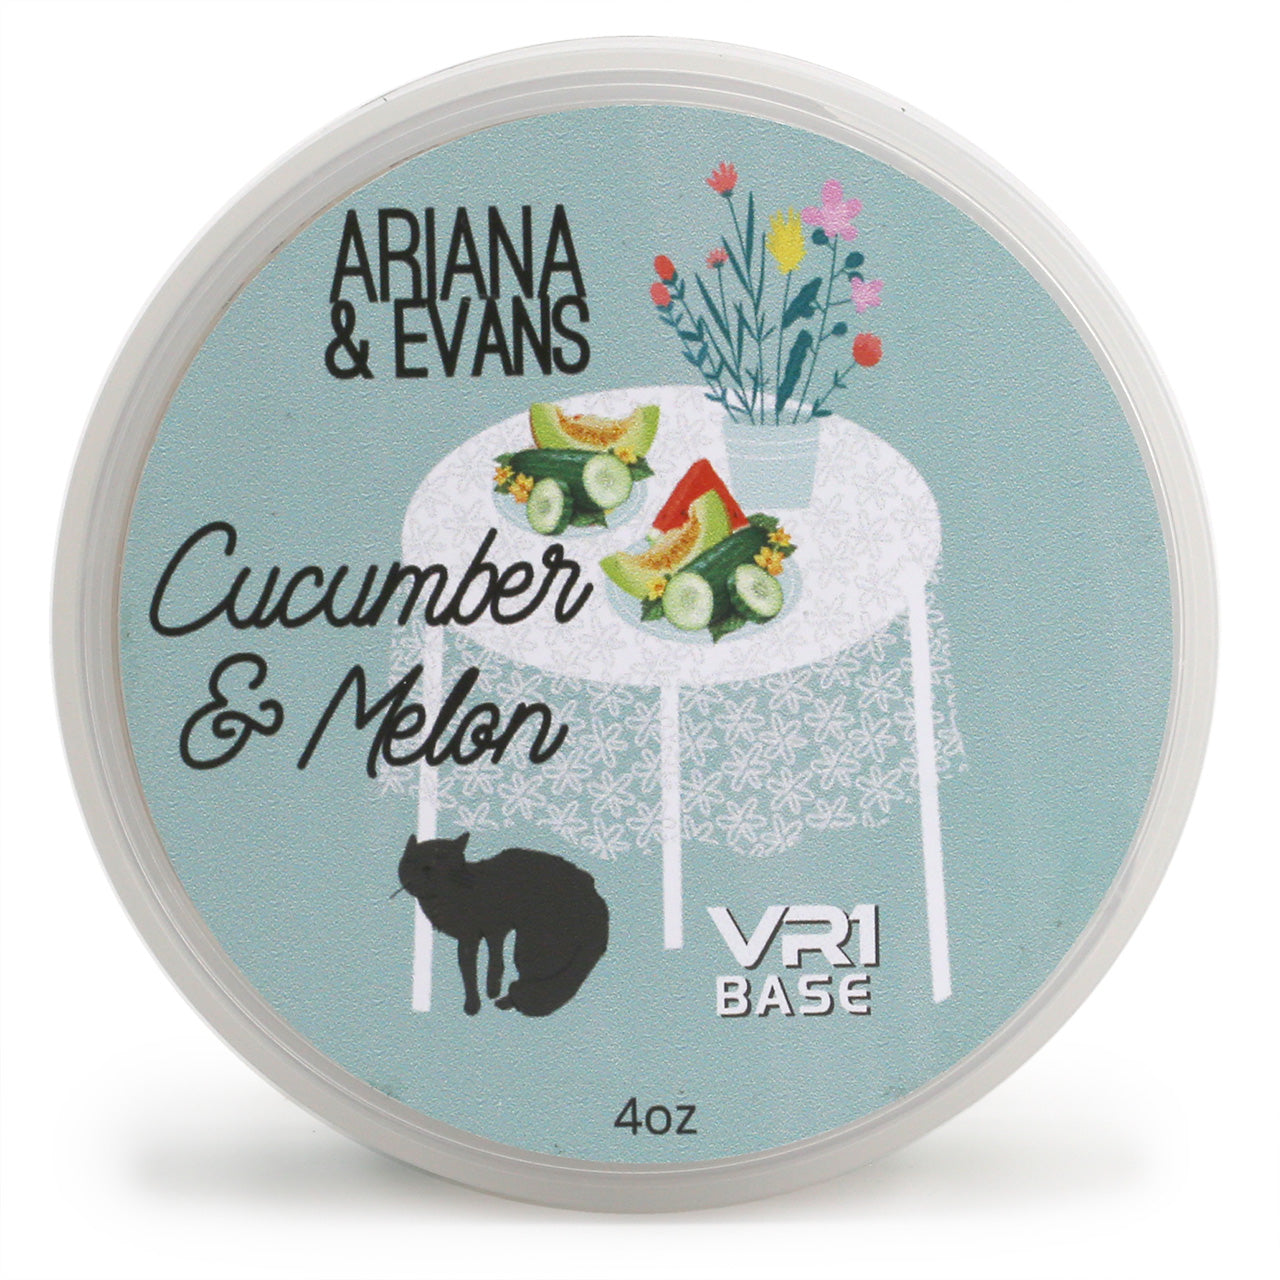 Cucumber Melon Shaving Soap from Ariana & Evans, top label view